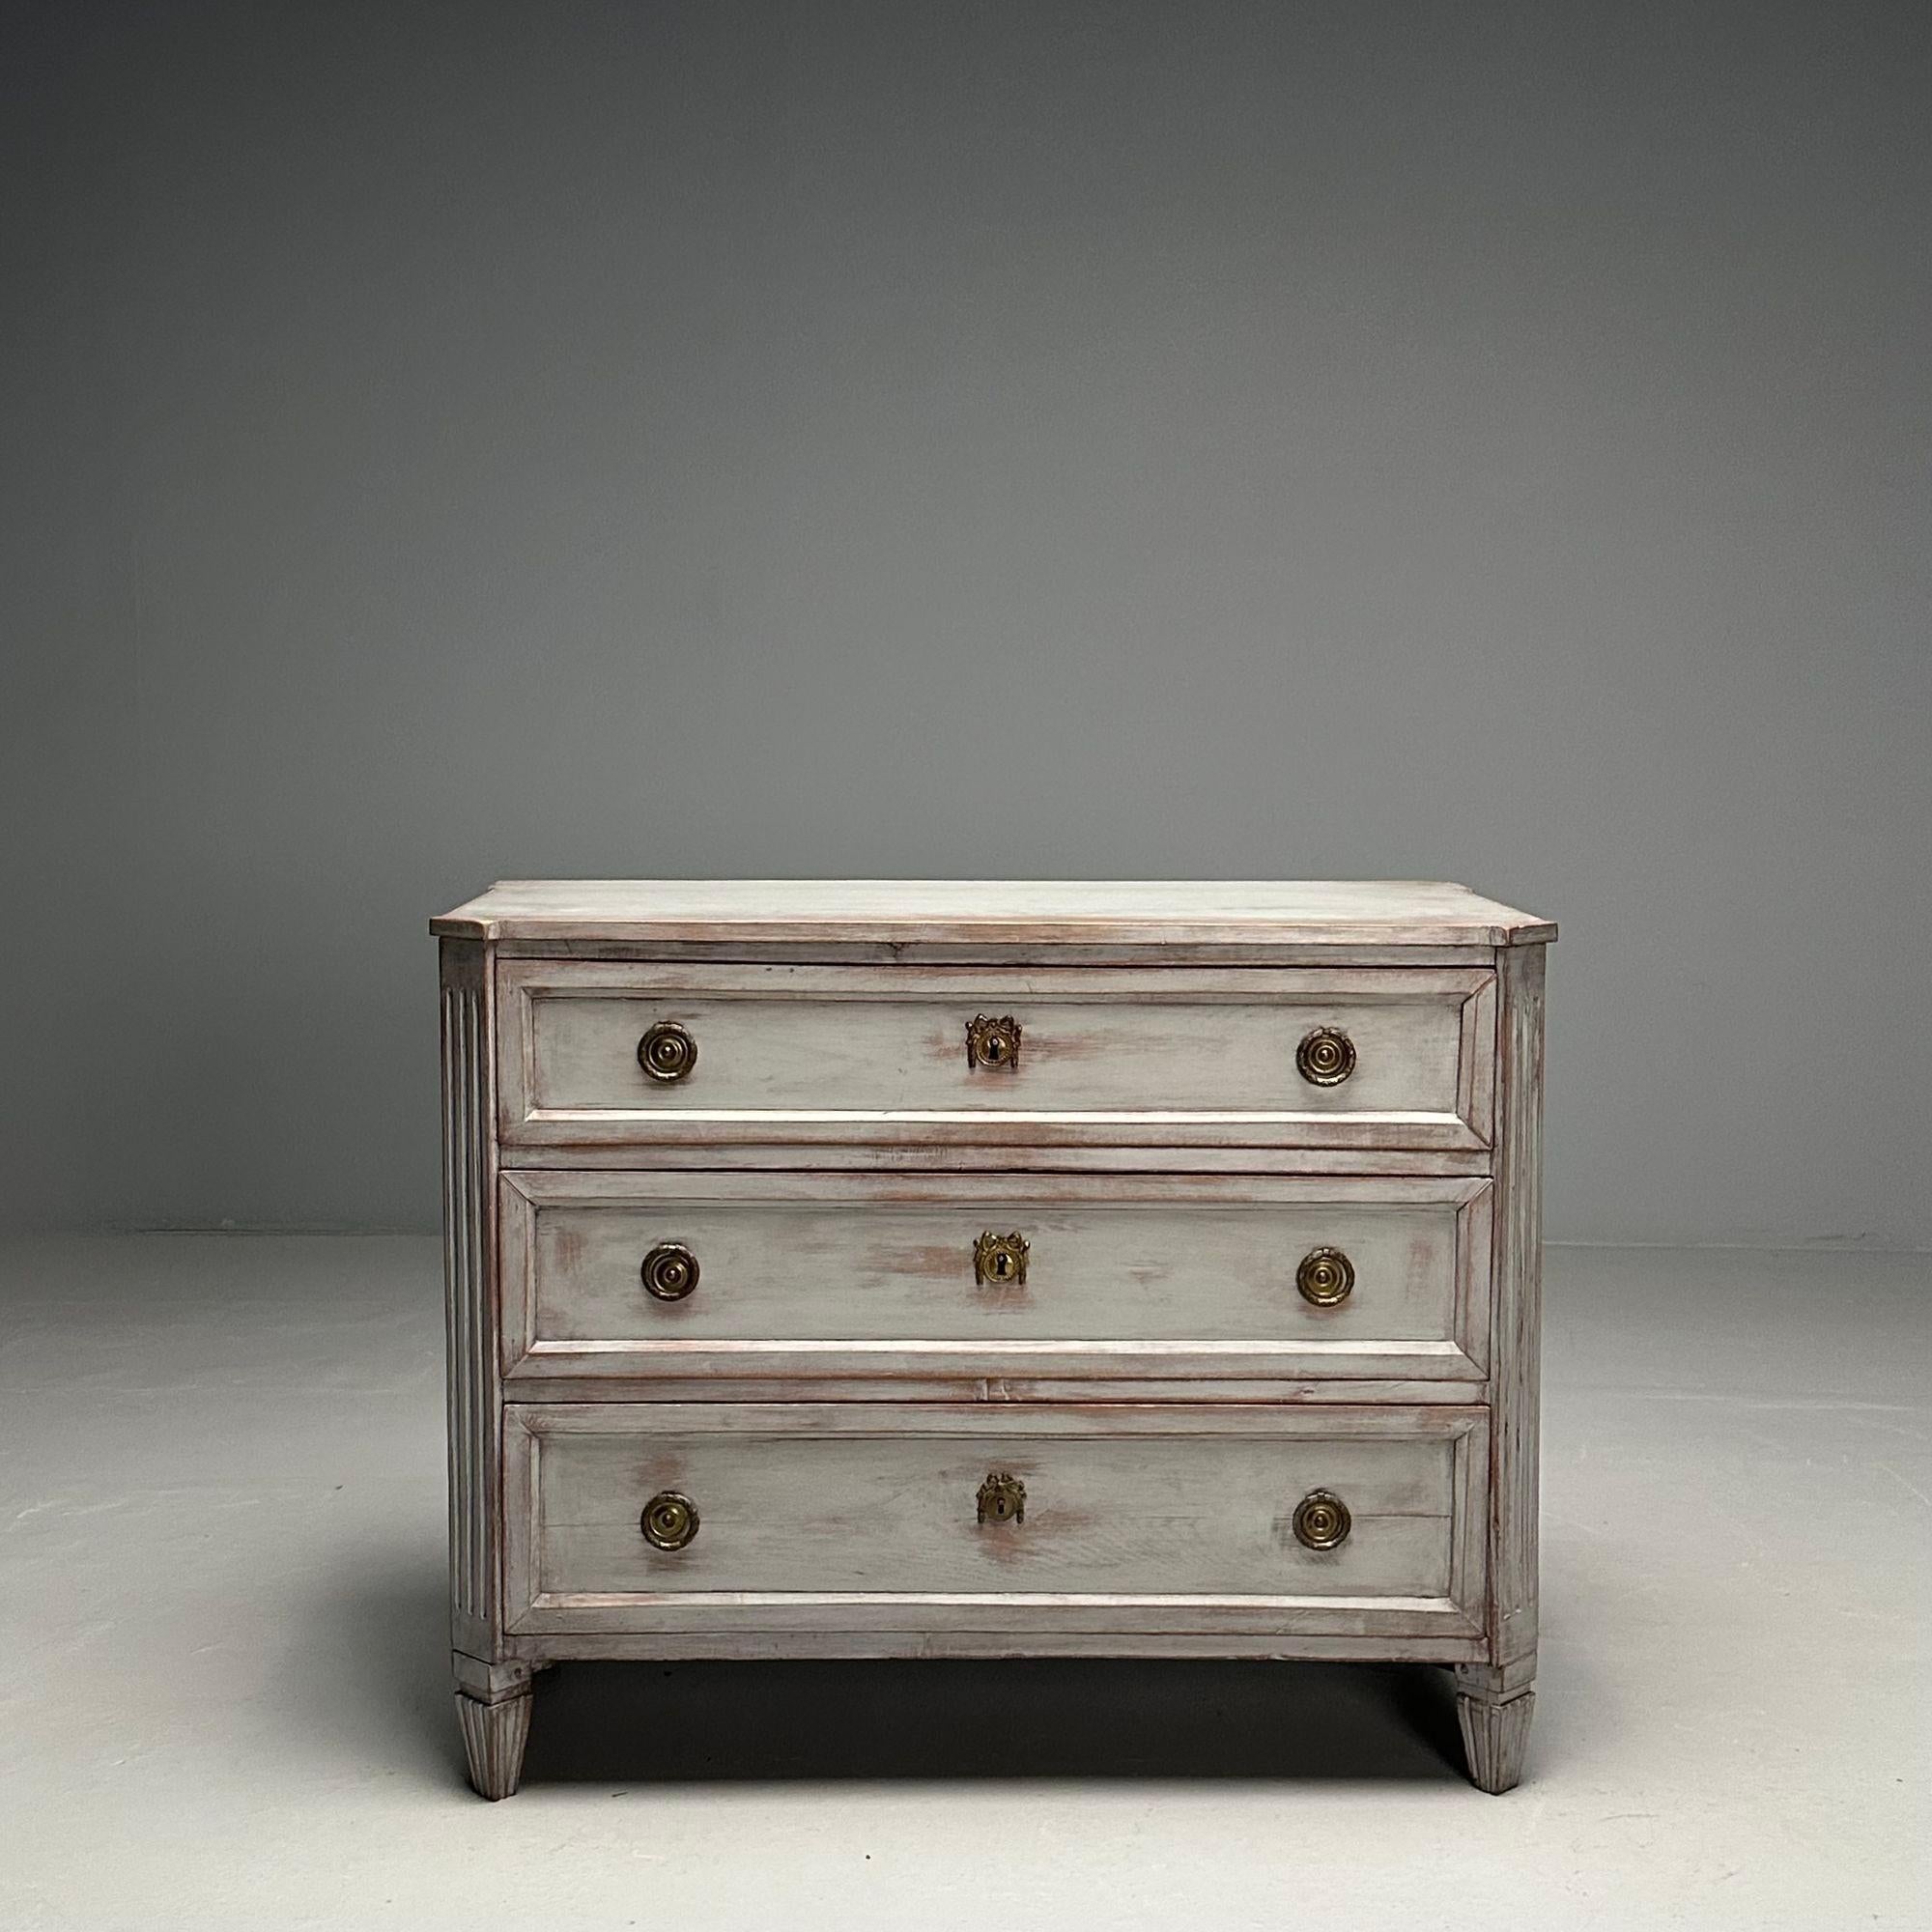 Gustavian, Swedish Commode, Gray Paint Distressed, Brass, Sweden, 1800s

Gustavian dresser or chest of drawers designed and produced in Sweden in the first half of the 19th century. Having a distressed gray paint decorated finish with fluted side